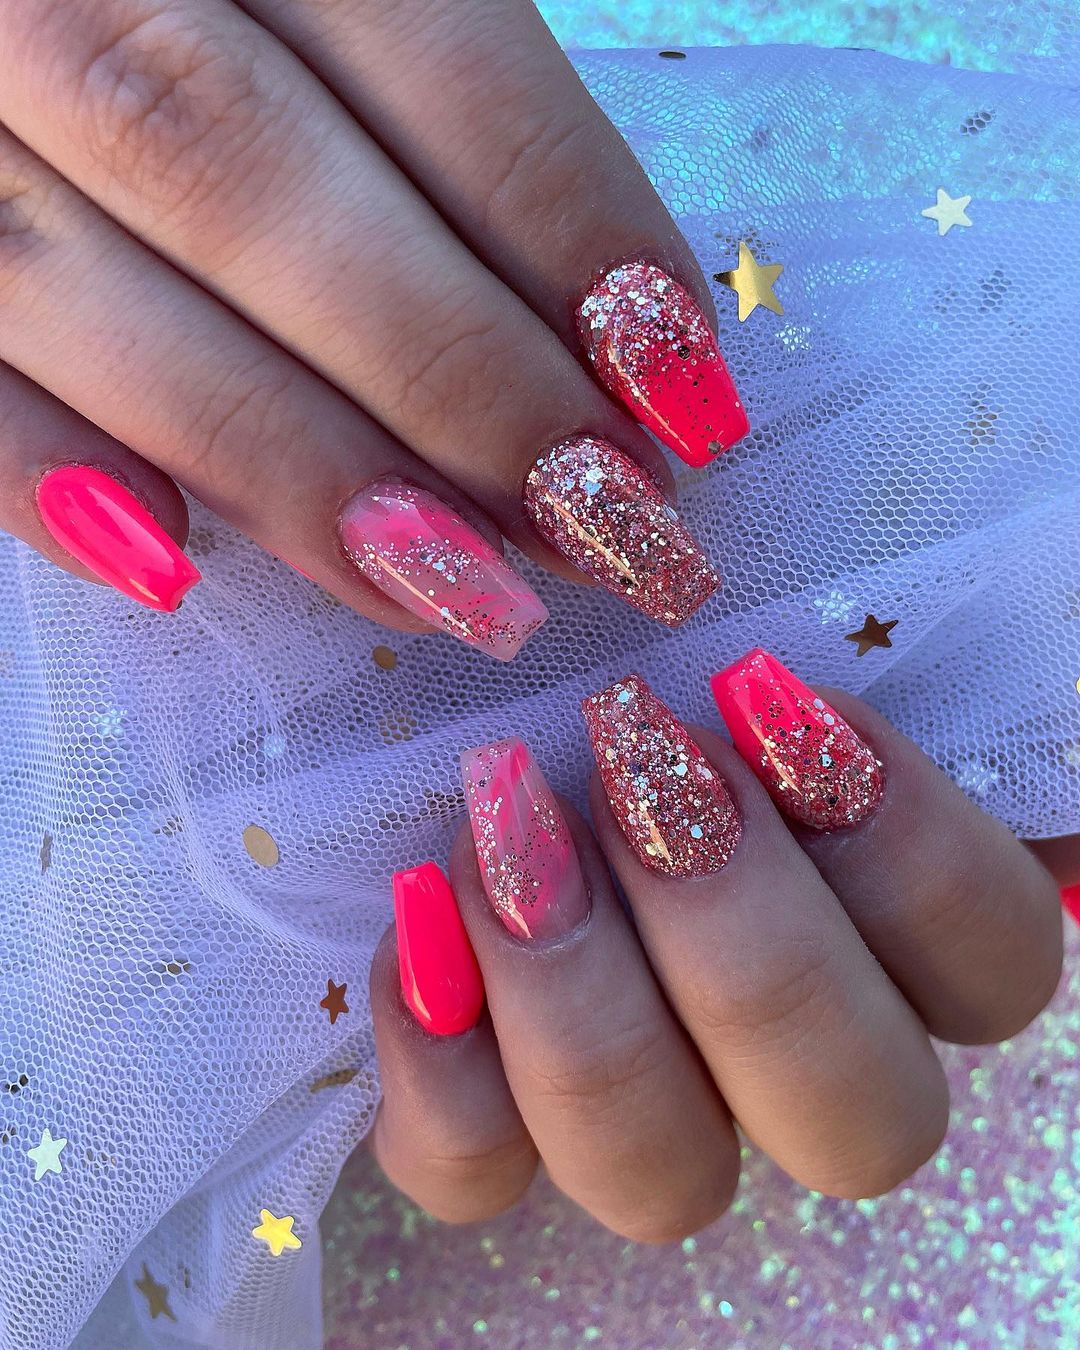 Short Coffin Nails with Neon Pink Design and Glitter